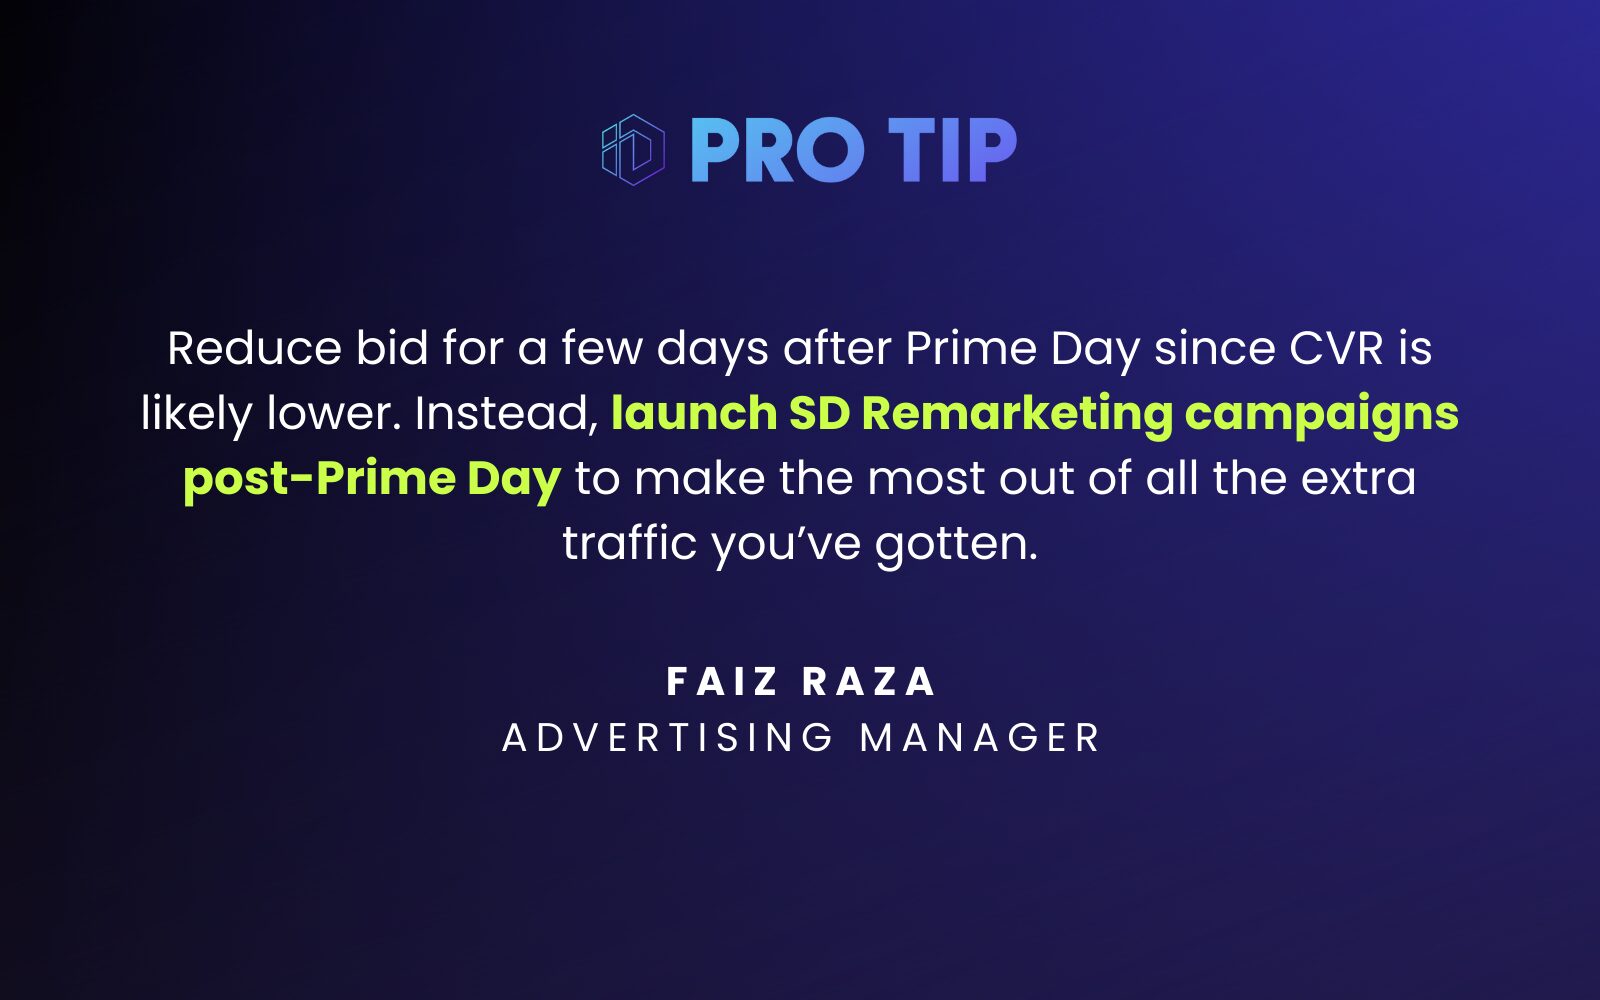 “Reduce bid for a few days after Prime Day since CVR is likely lower. Launch SD Remarketing campaigns post Prime Day, to make the most out of all the extra traffic you got.” Faiz Raza Advertising Manager